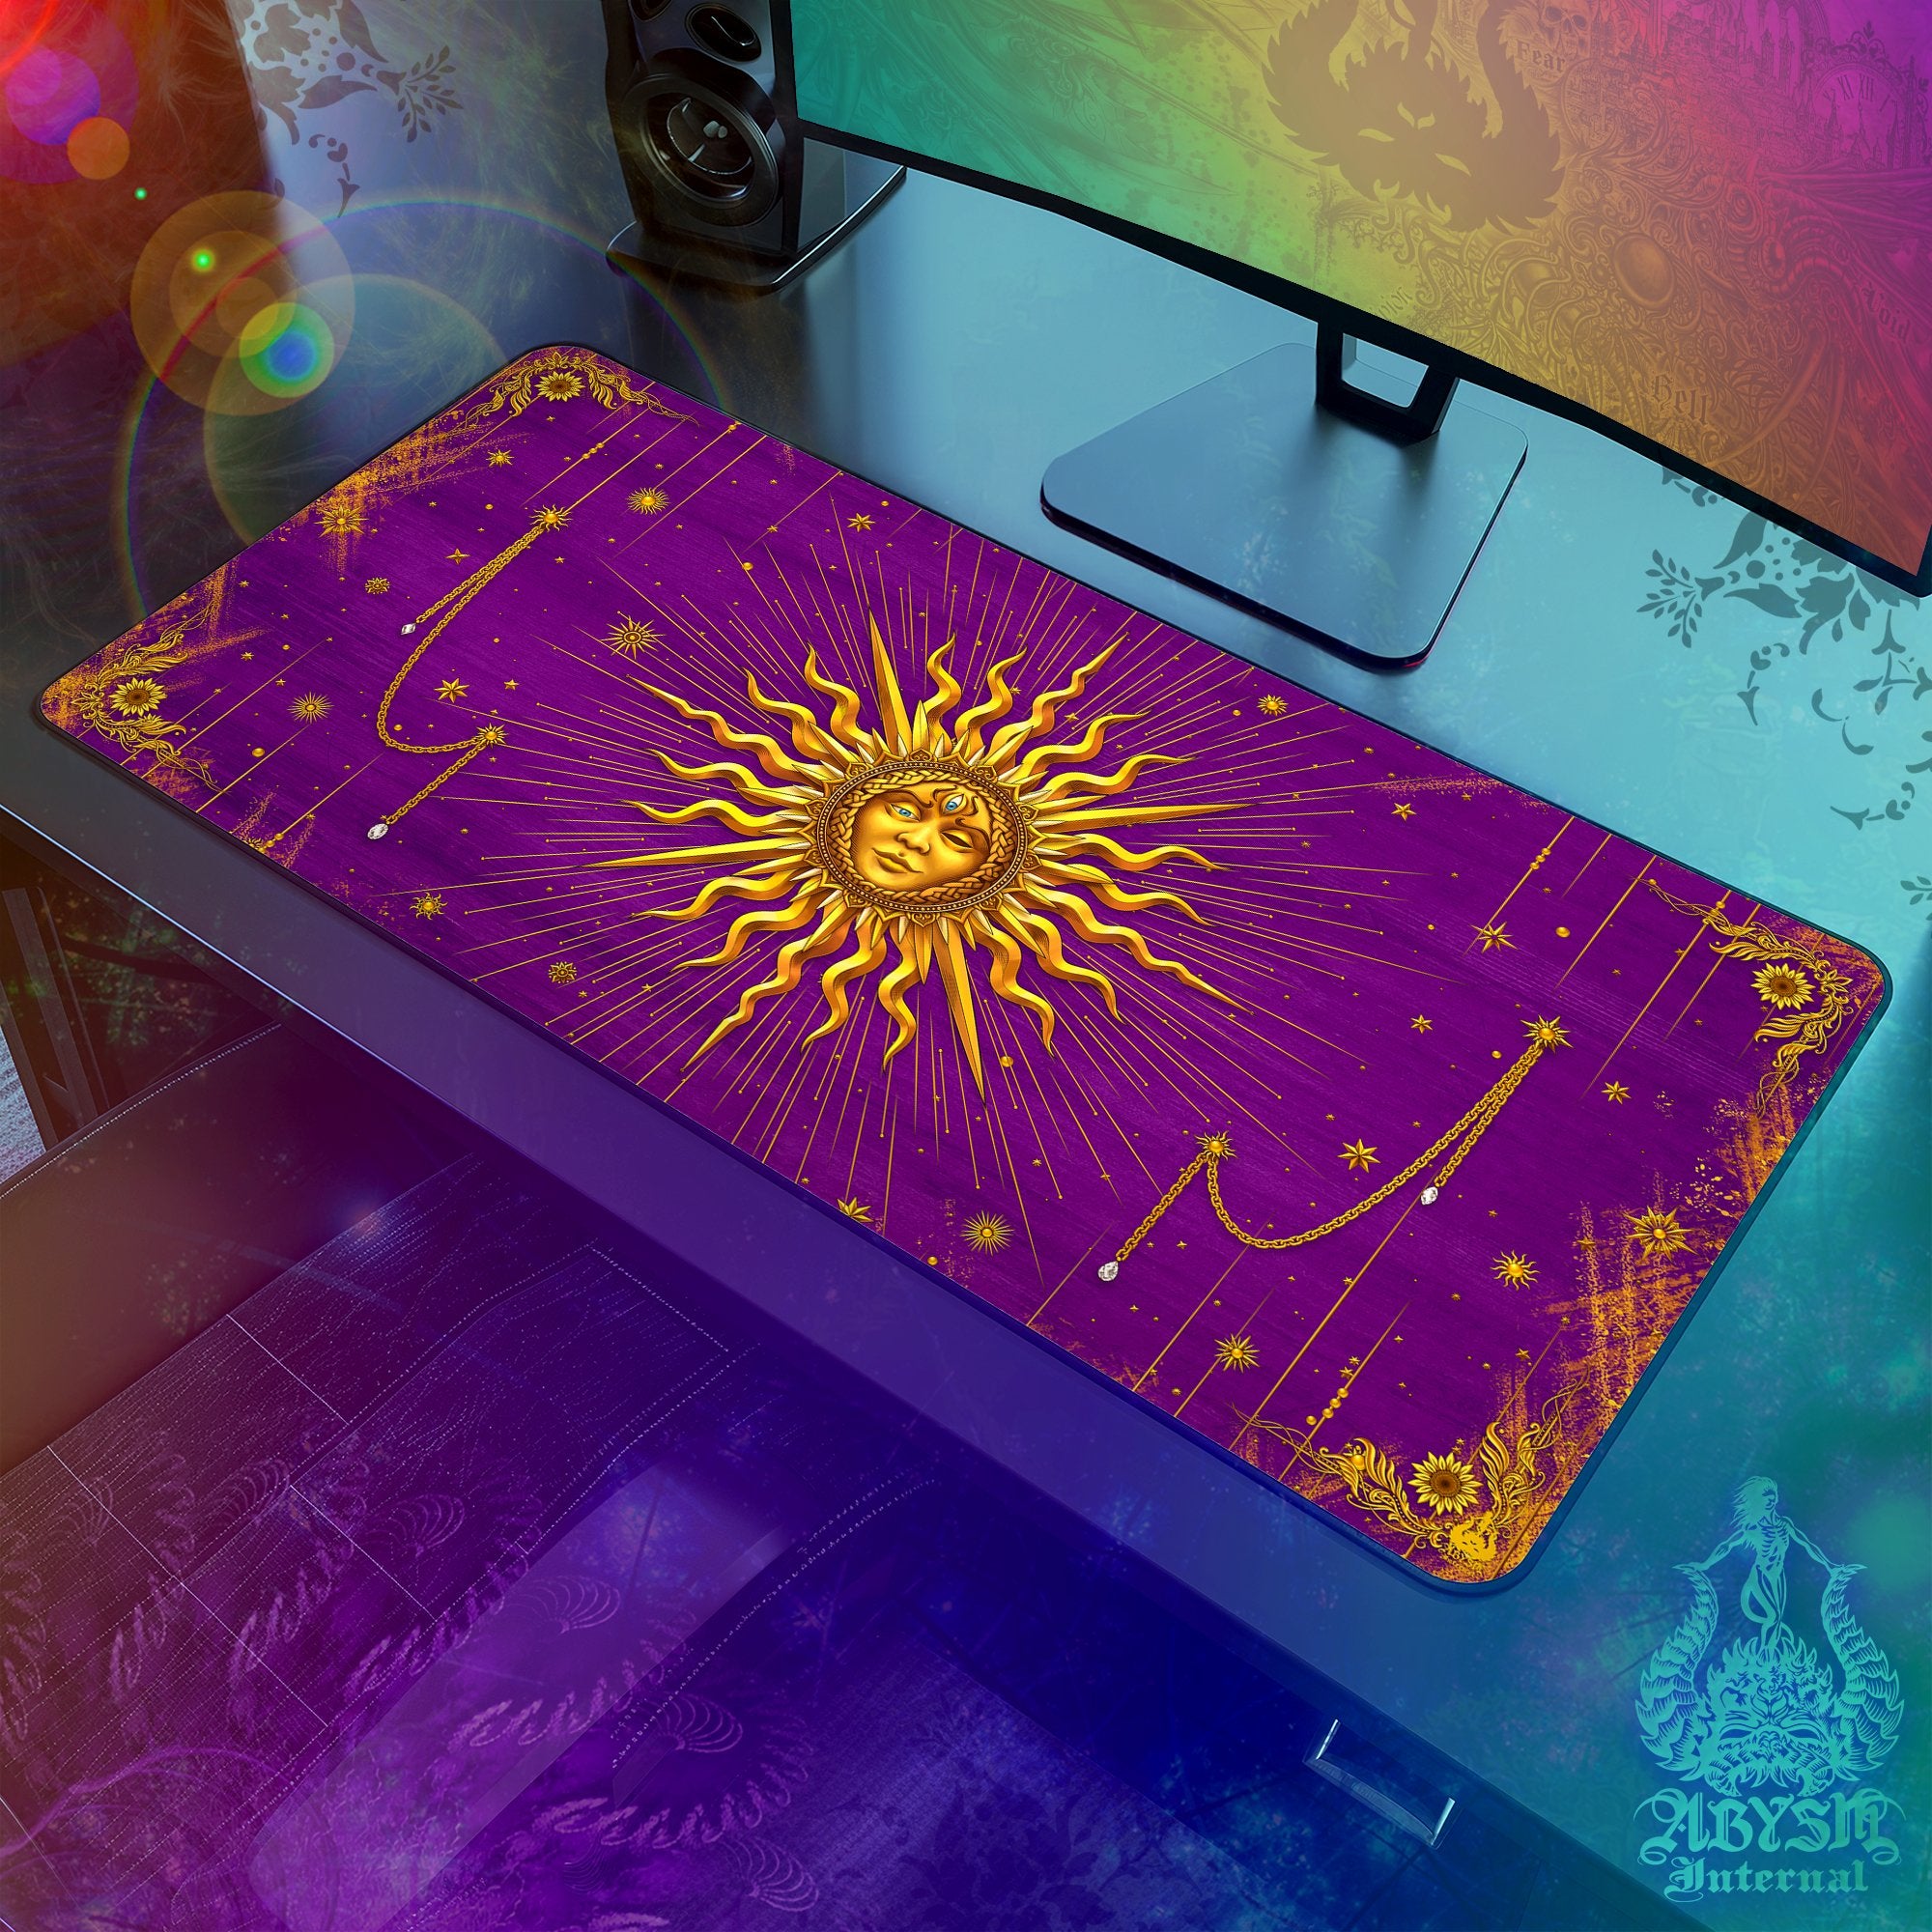 Gold Sun Mouse Pad, Tarot Arcana Gaming Desk Mat, Witch Workpad, Boho Table Protector Cover, Indie Room, Esoteric Art Print - 7 Colors - Abysm Internal